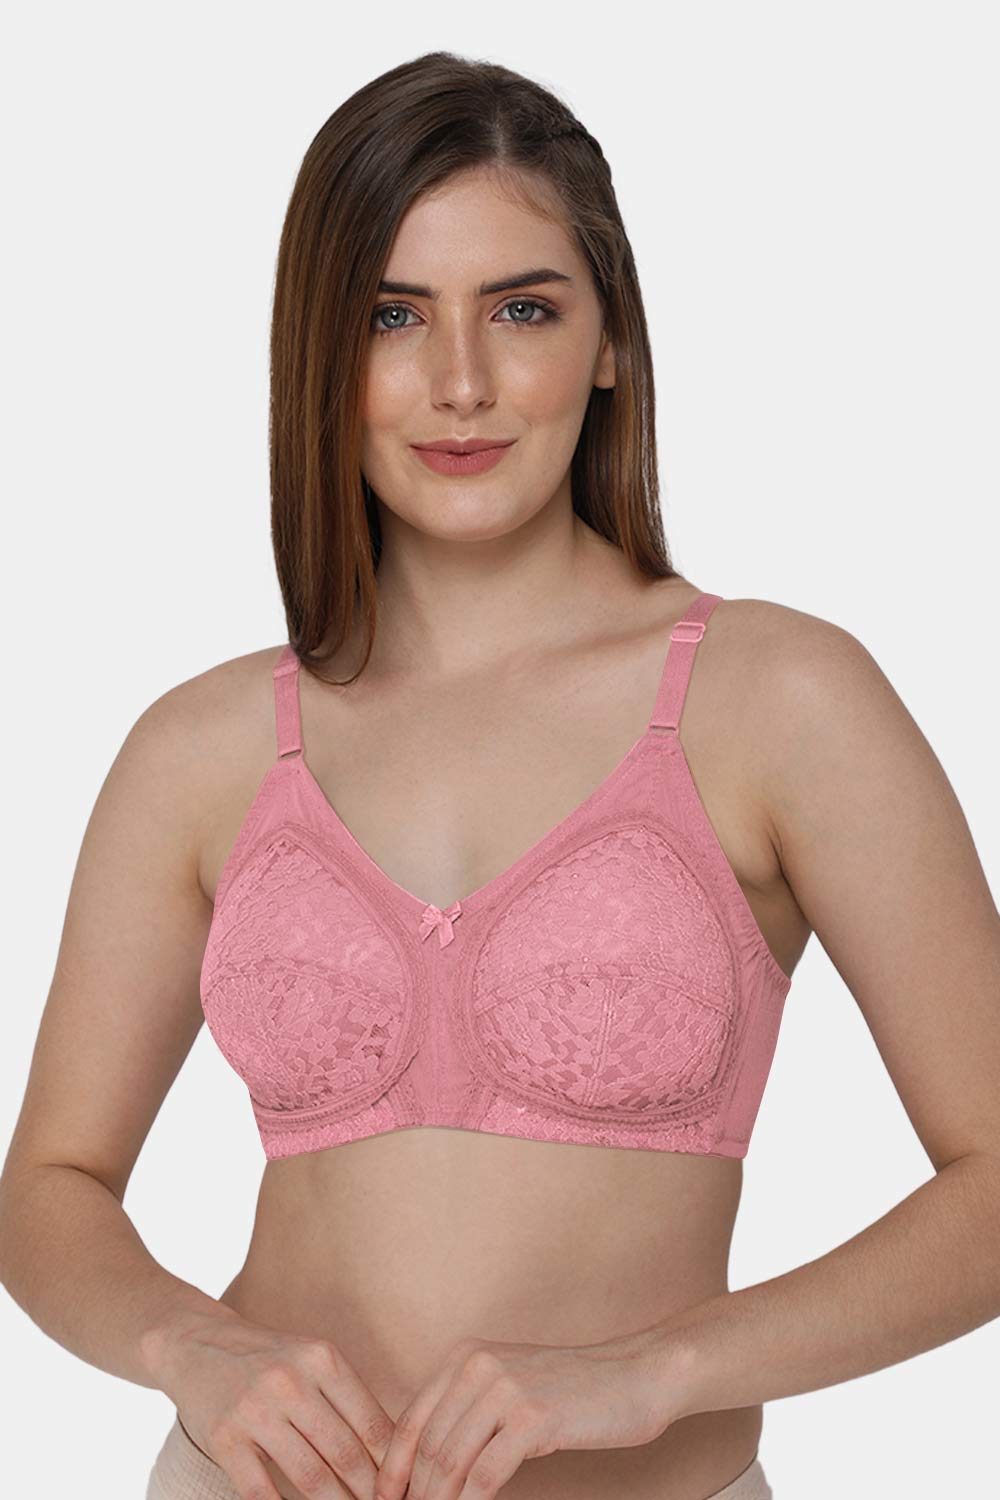 Buy Intimacy Padded Non Wired Medium Coverage T-Shirt Bra - Pink